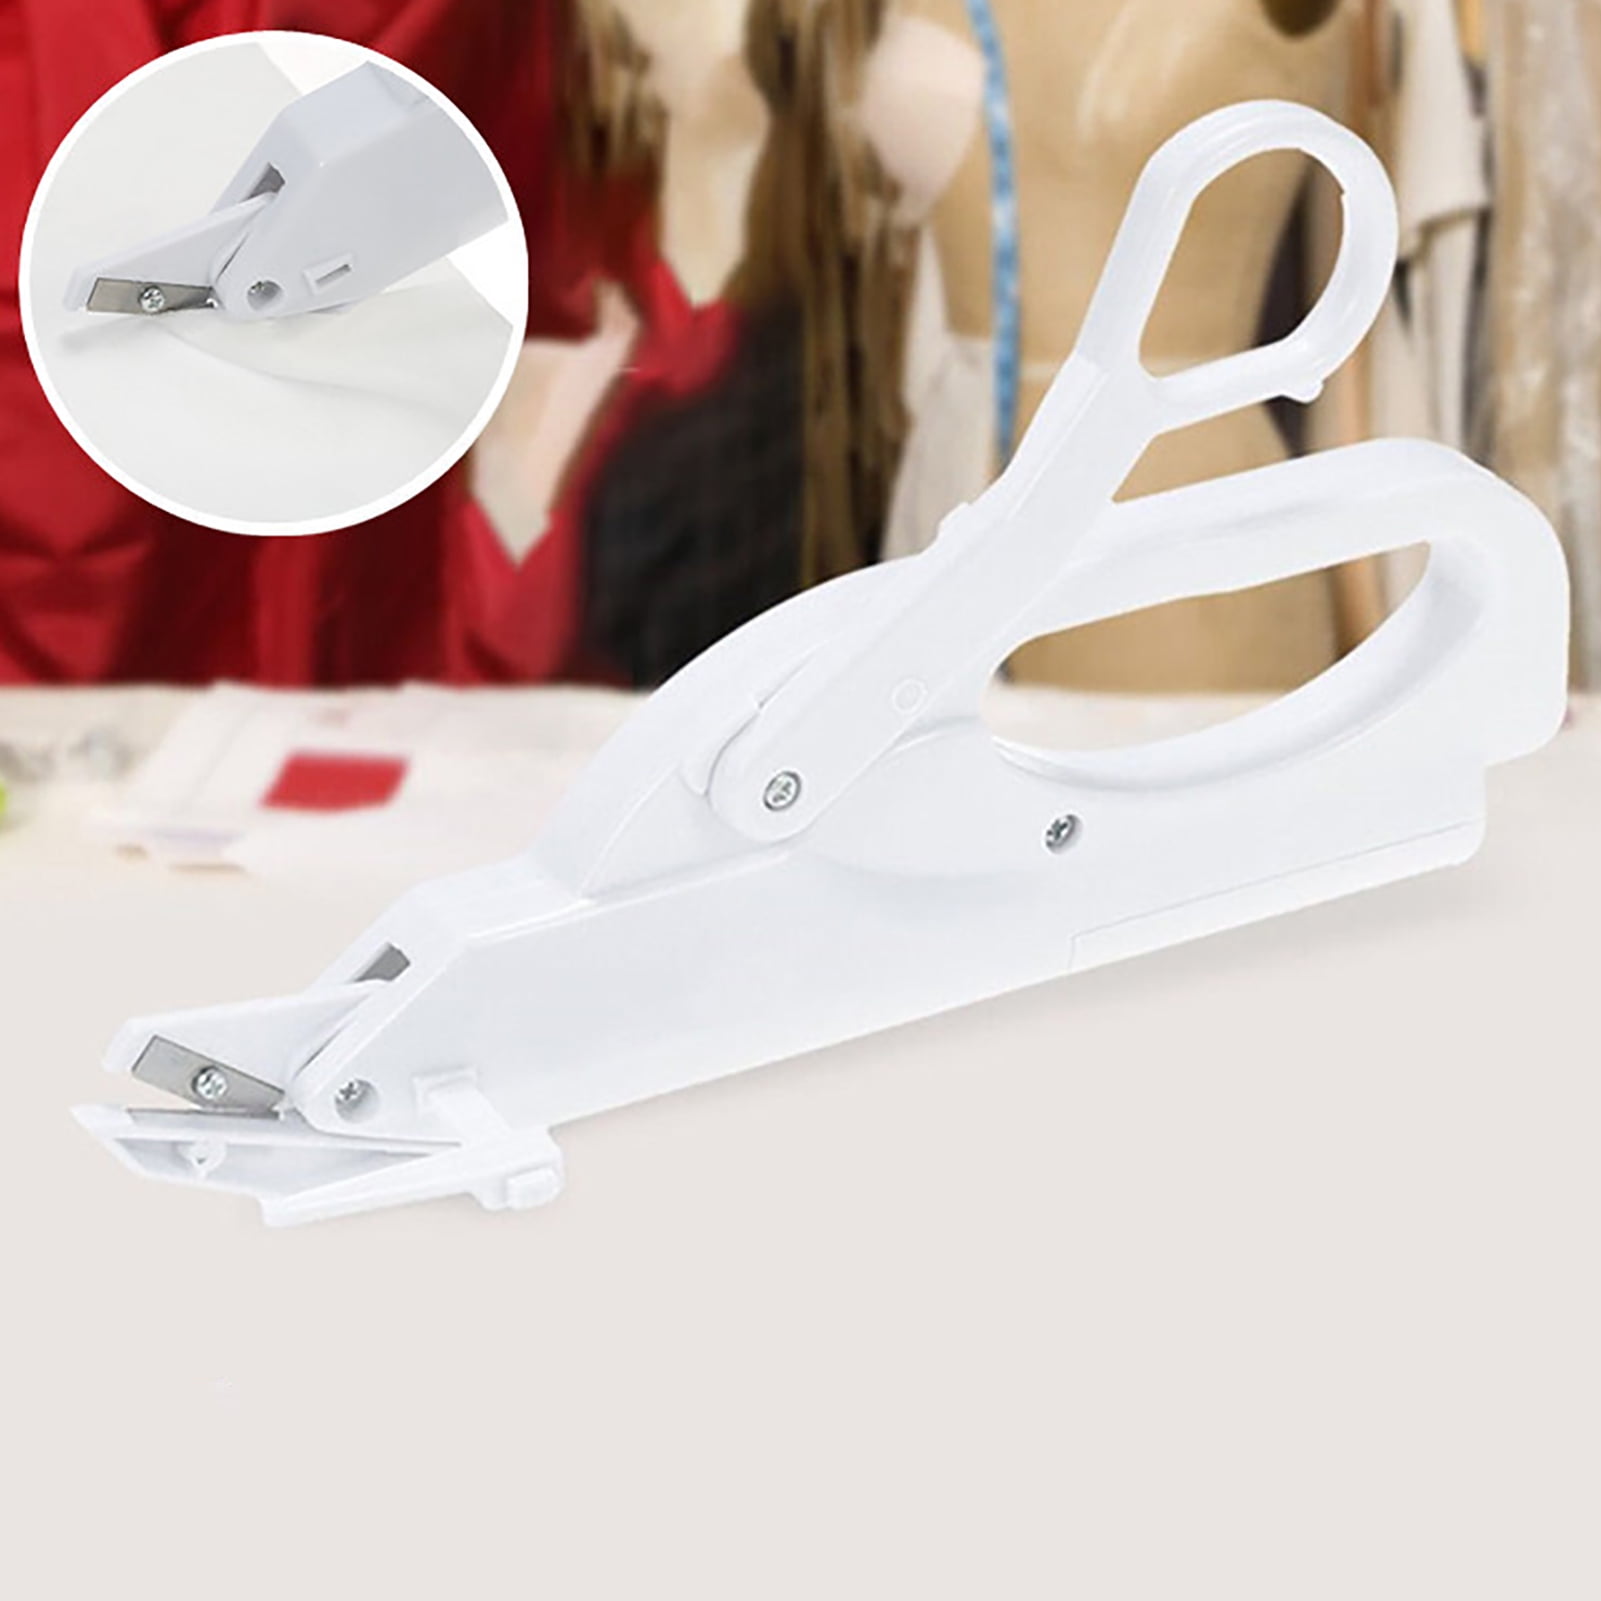 Anself Multipurpose Electric Automatic Scissors Shears Safe Handheld Electric Fabric Sewing Cutting Machine, Size: 23